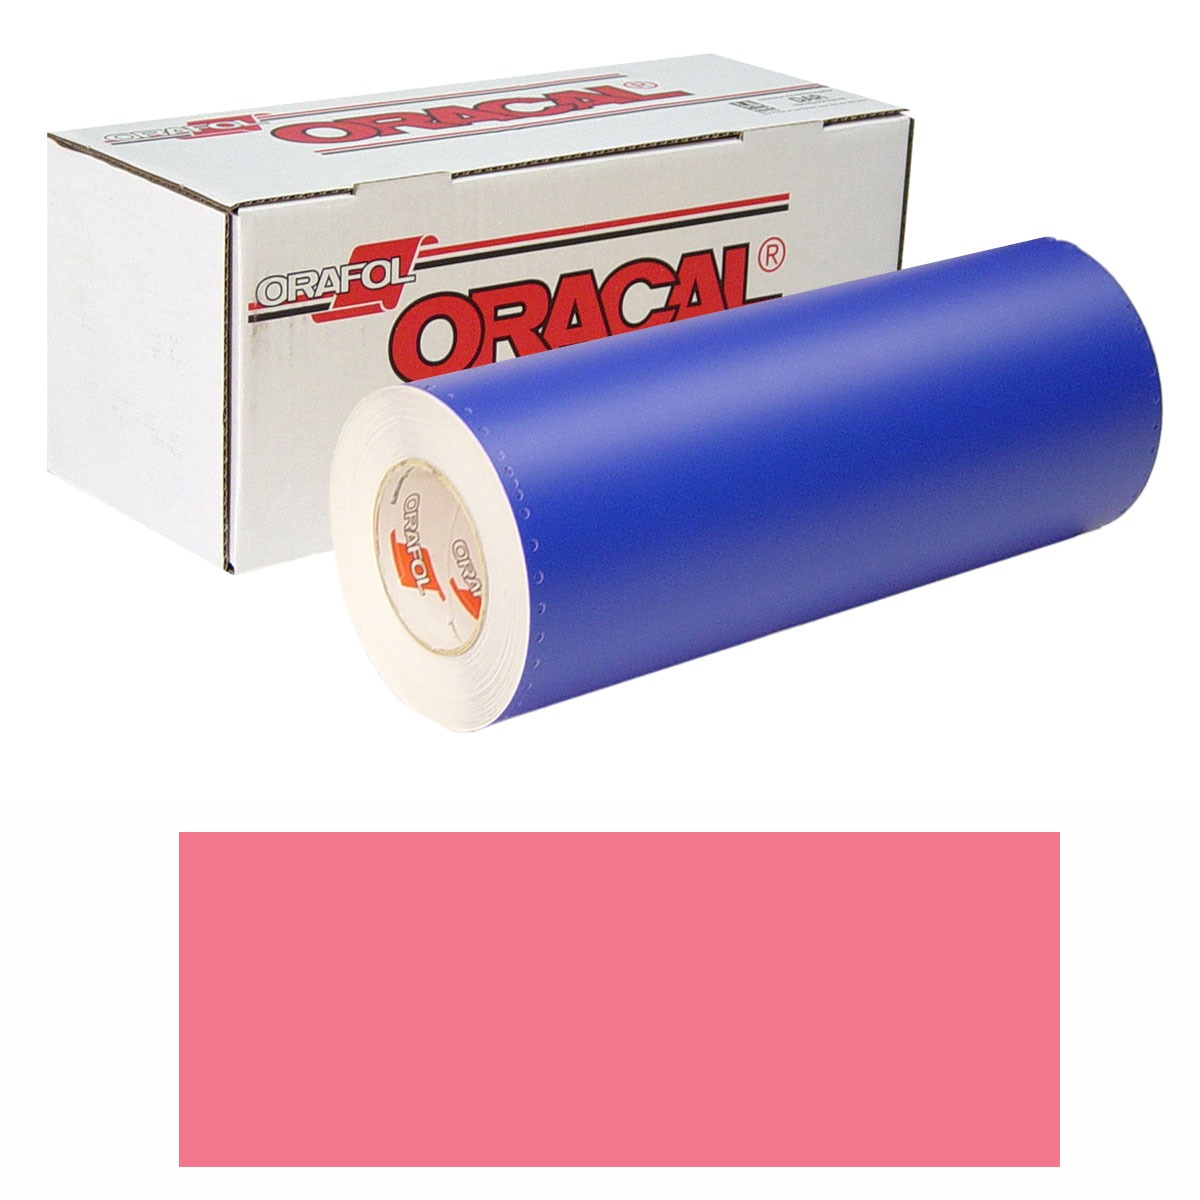 ORACAL 8300 30in X 10yd 032 Light Red